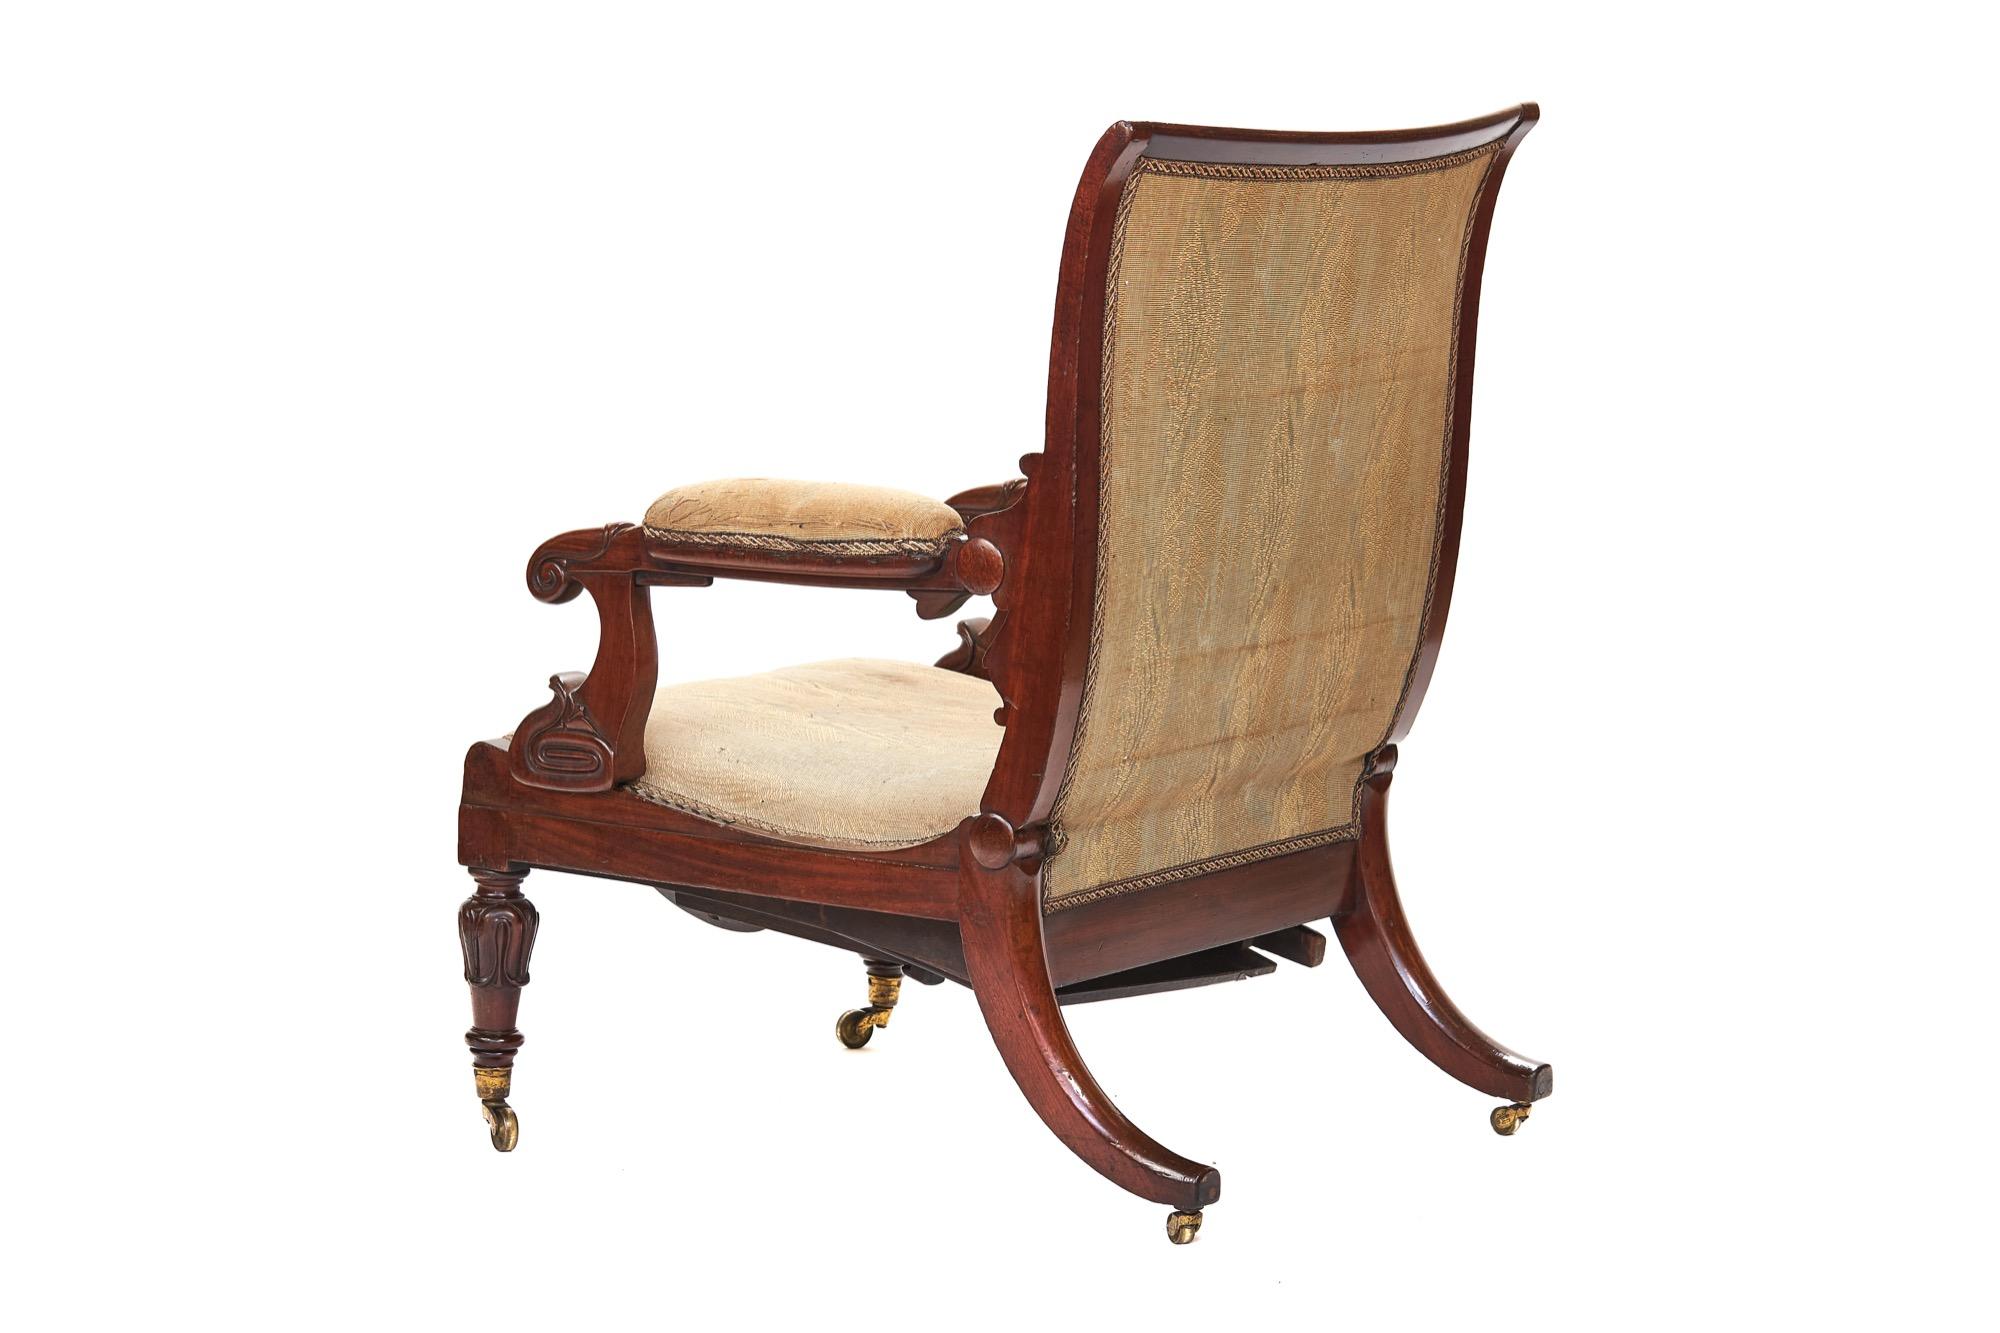 English Daws Patent Improved Reclining Chair, circa 1830 For Sale